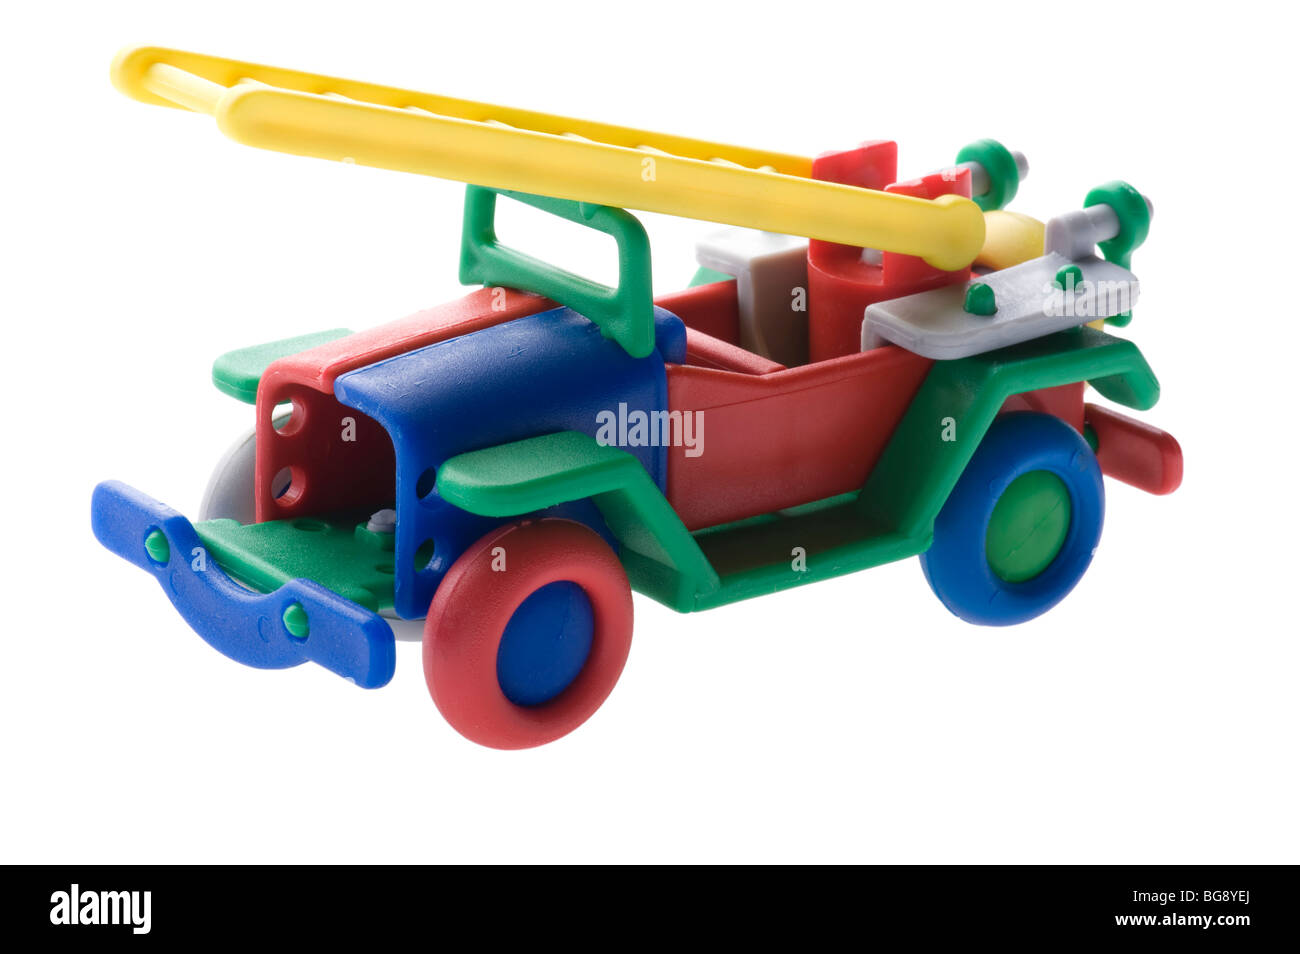 object on white Toy Fire engine Stock Photo